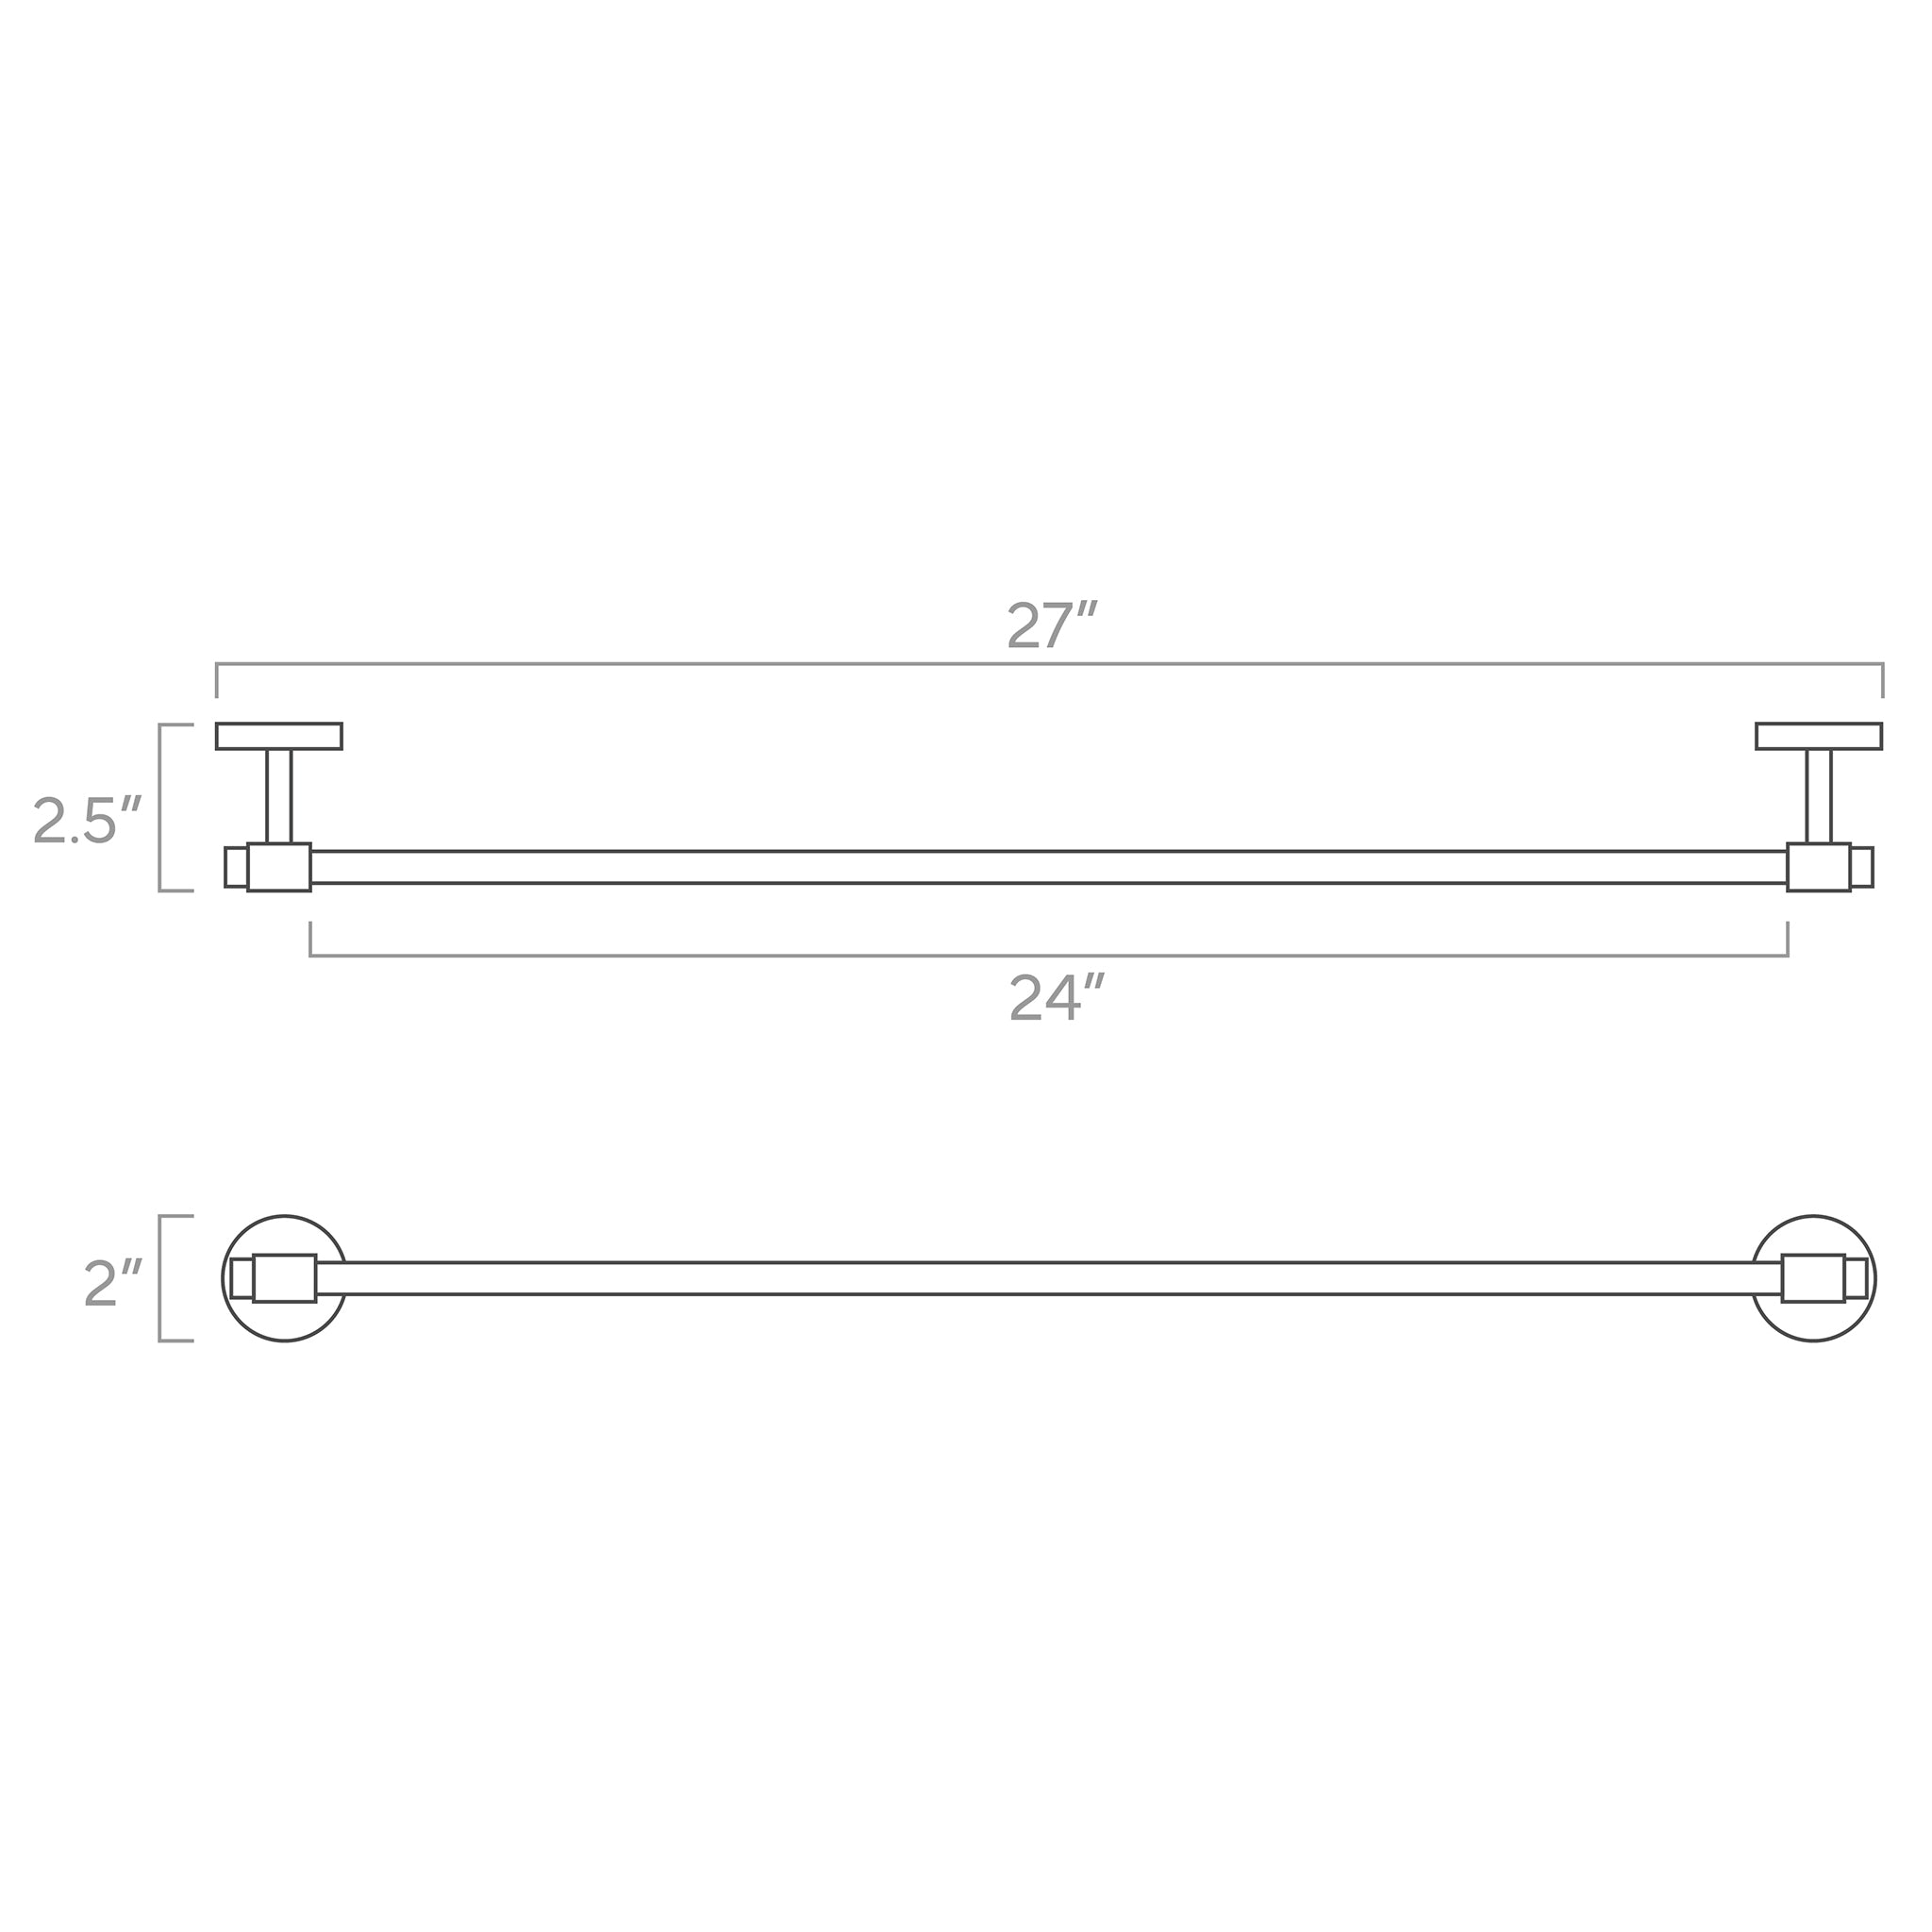 ISO drawing Persona towel bar 24" Dutton Brown hardware